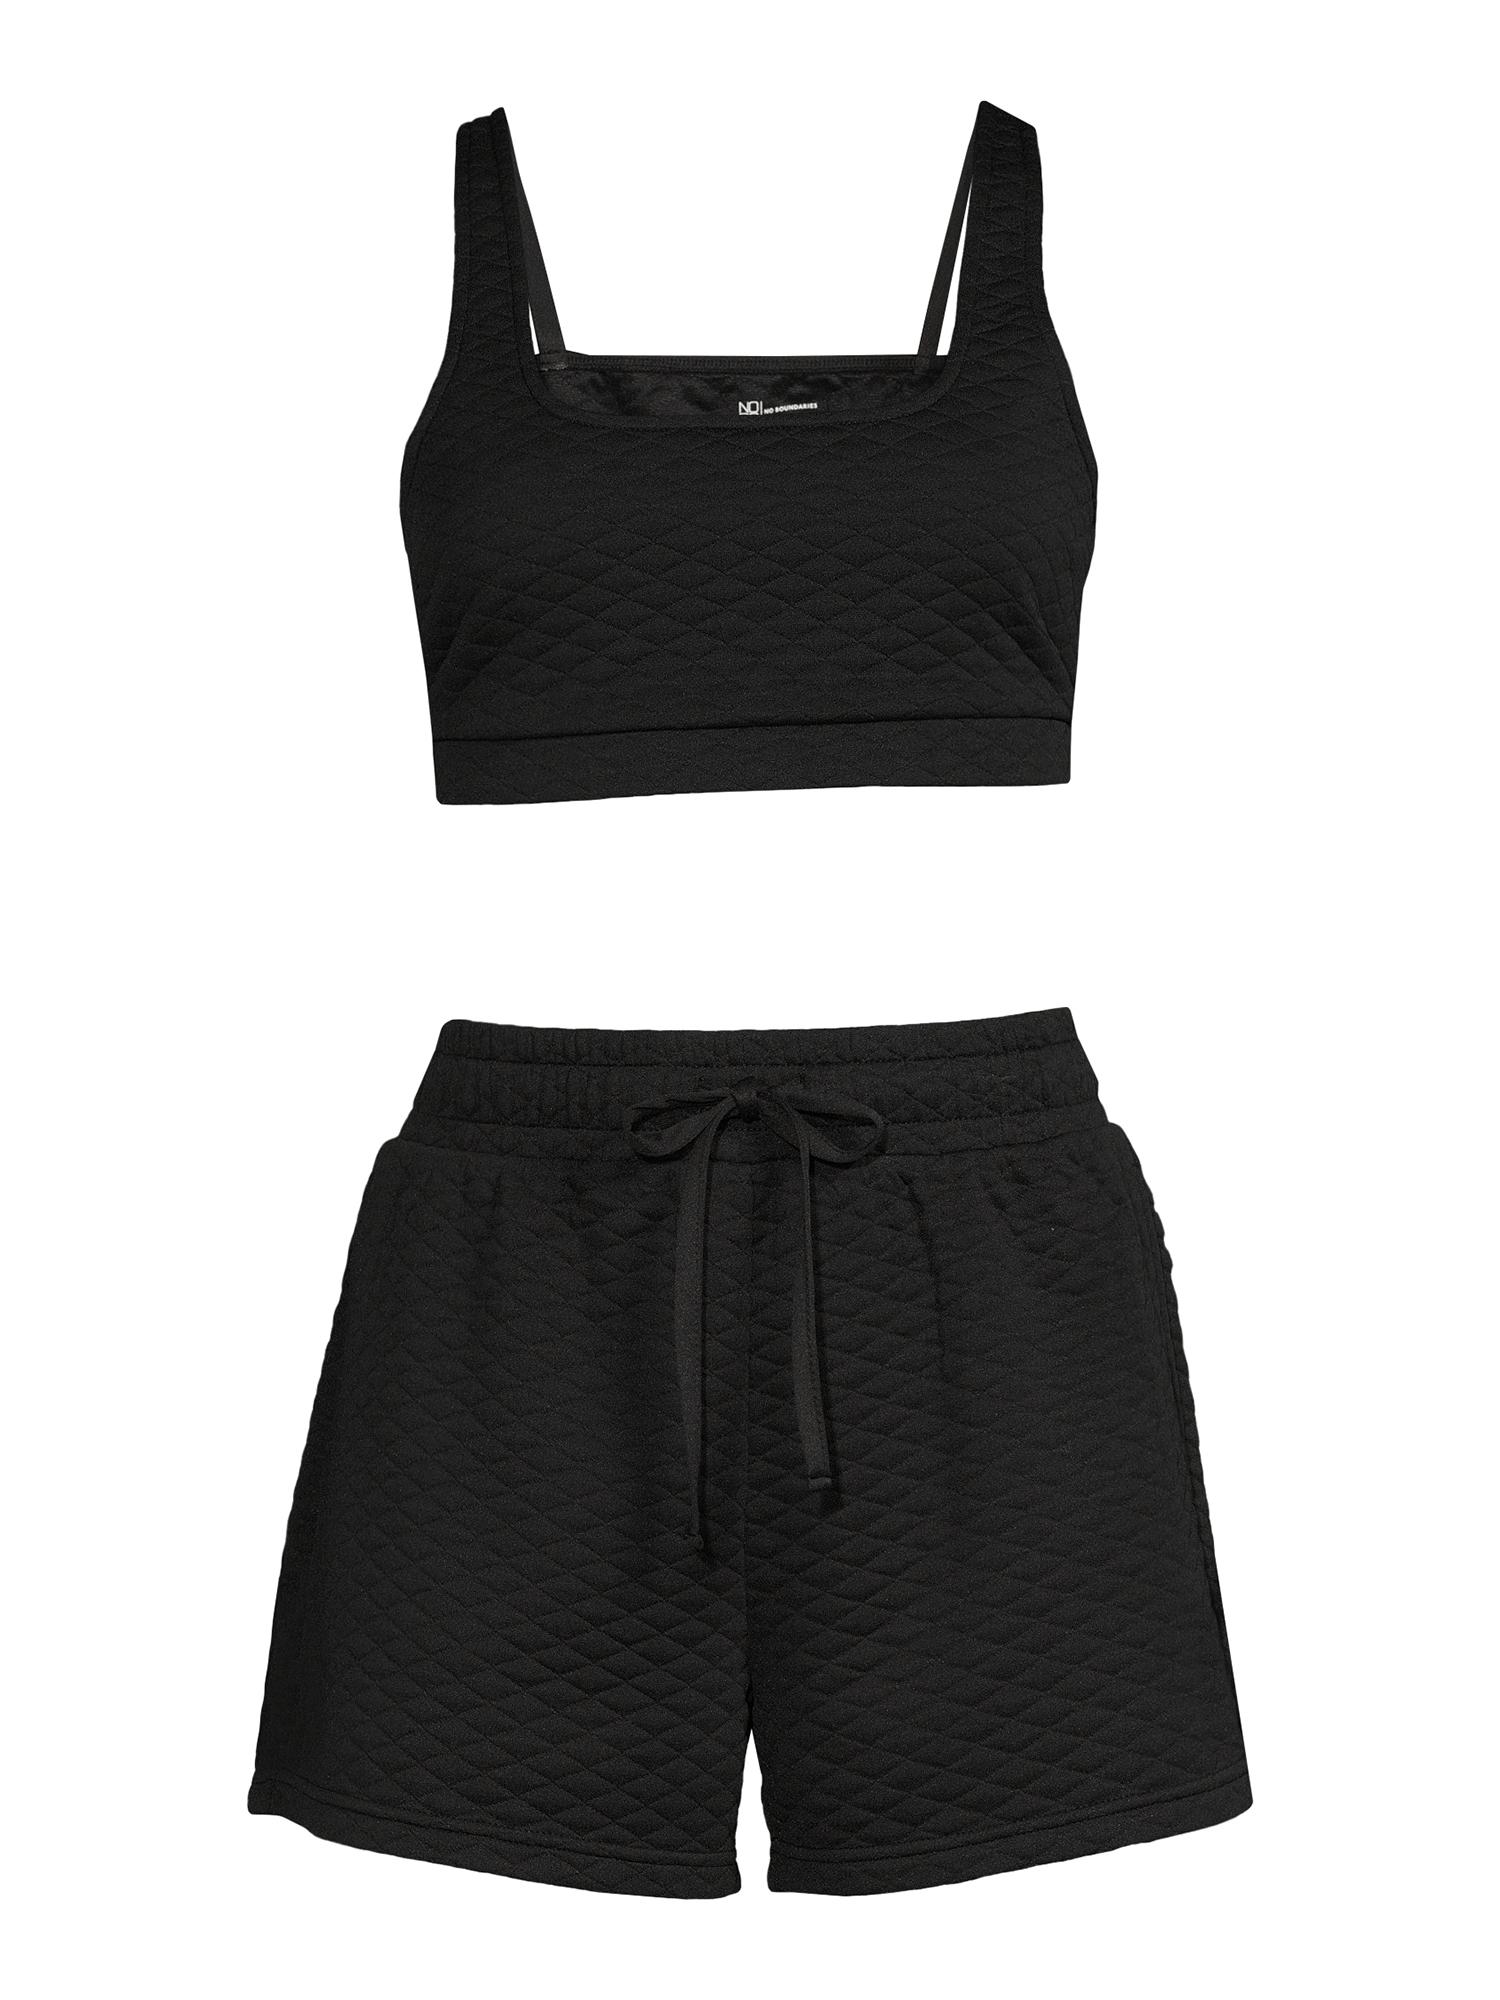 No Boundaries Juniors Quilted Crop Top and Shorts Set, 2-Piece - image 5 of 5